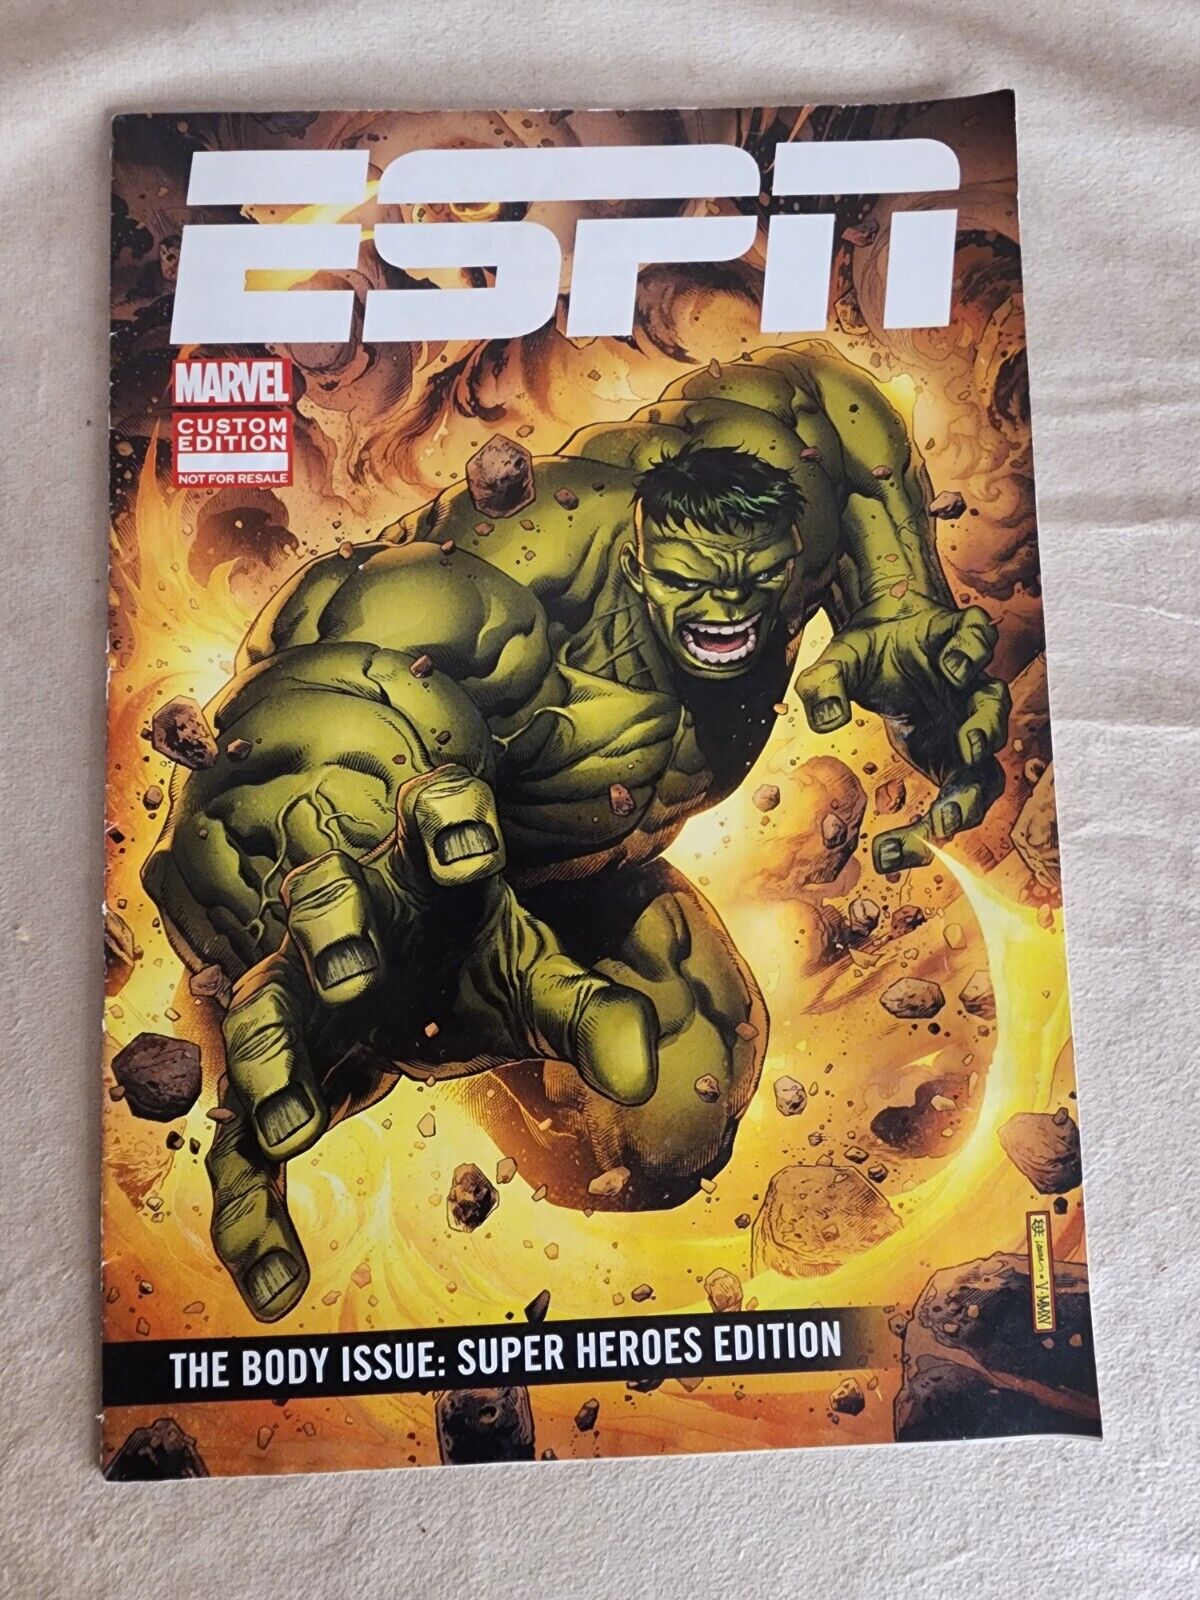 ESPN The Body Issue: Super Heroes Edition Comic Book 2015 Marvel Hulk